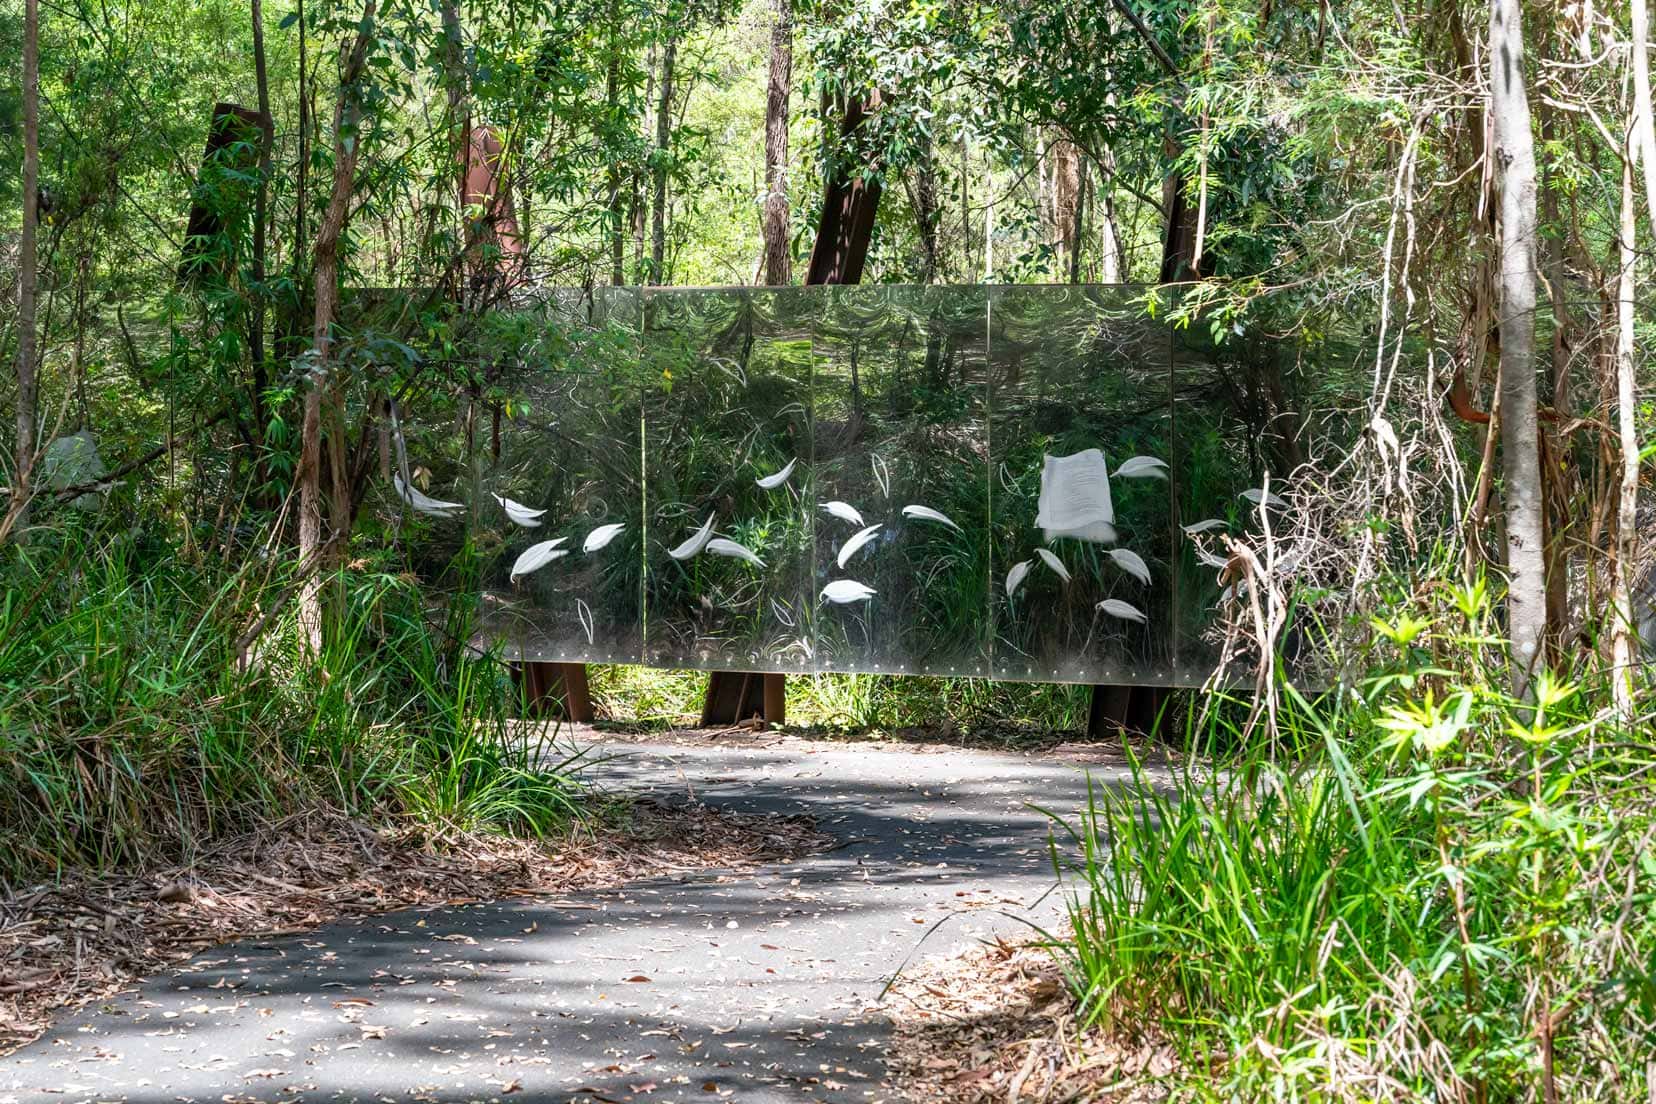 The mirrow wall at Swarbrick Art Loop showing the white feather etchings on it between the forest paths